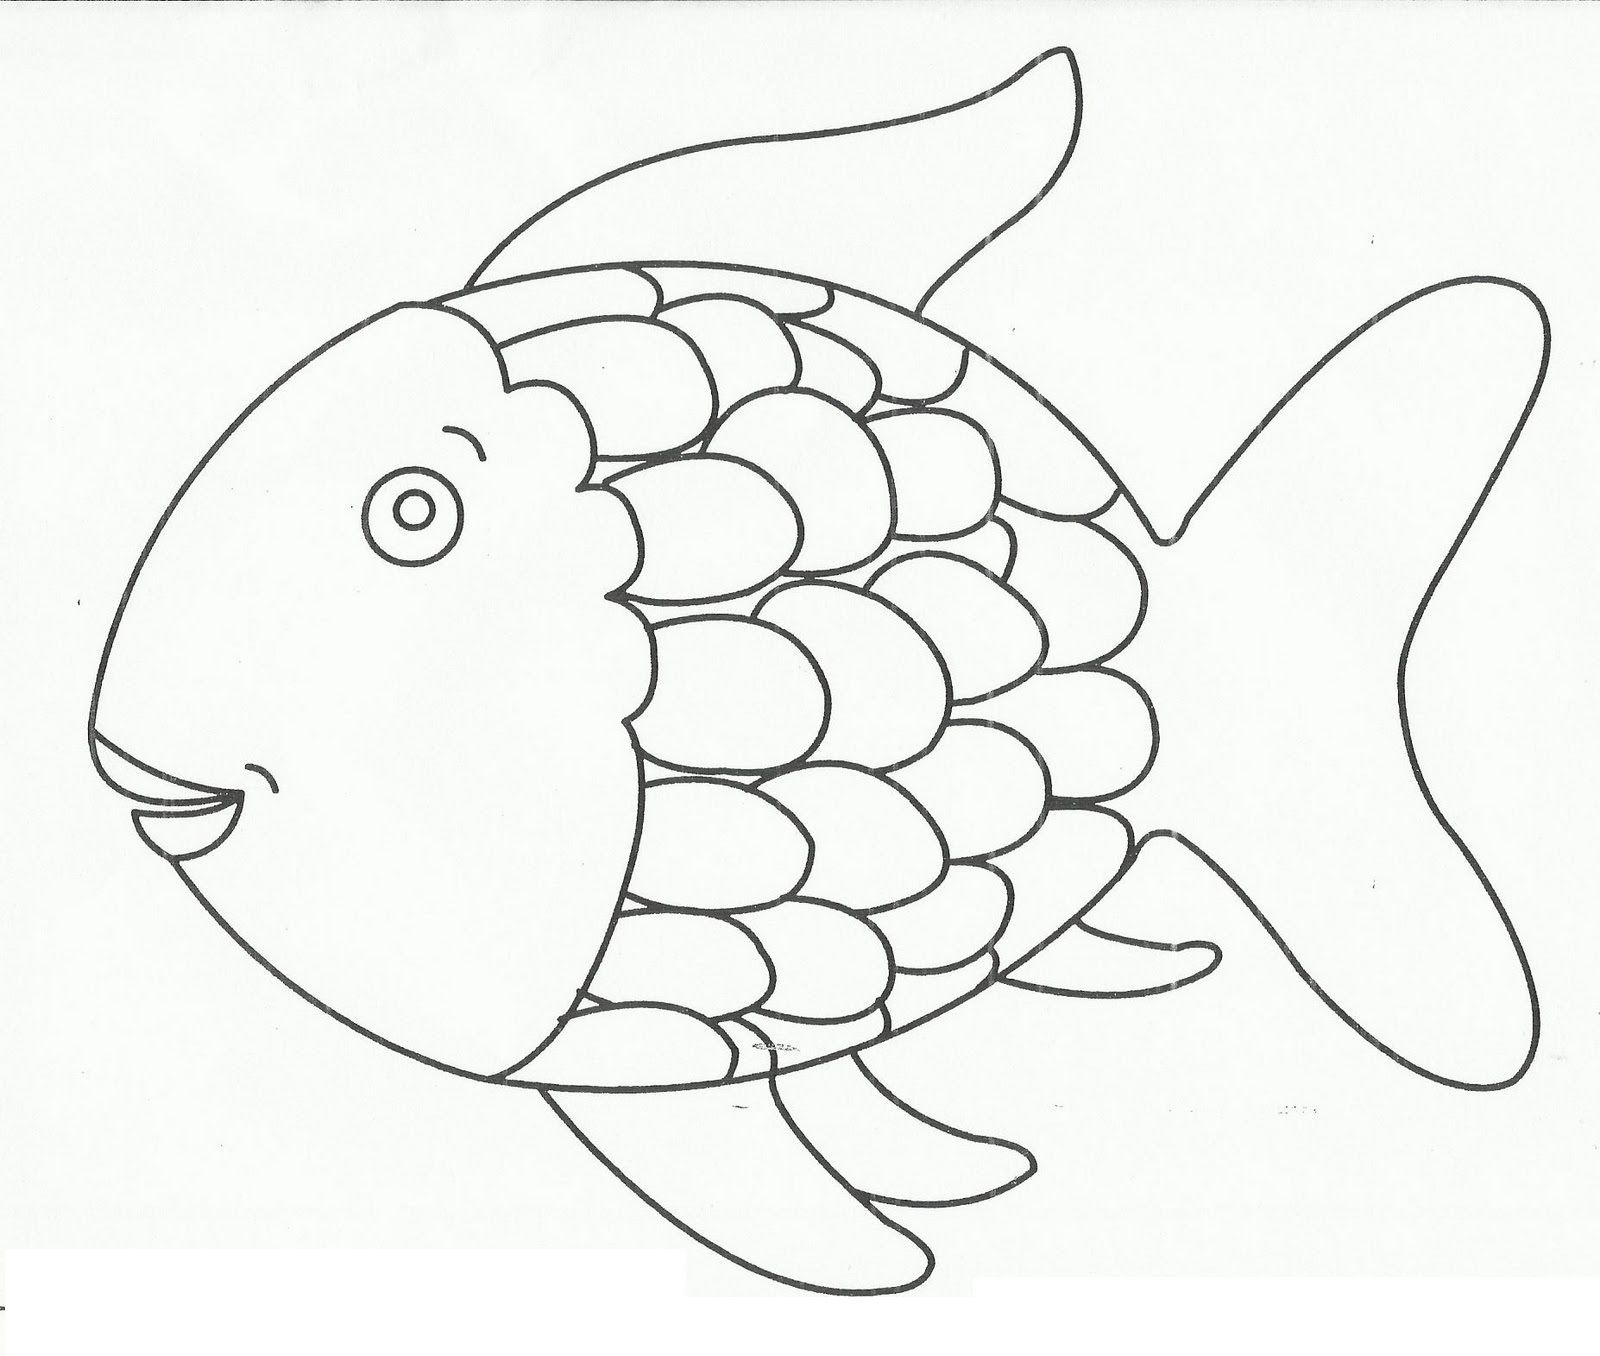 Fish With Scales Round Coloring Pages For Kids #cDc : Printable